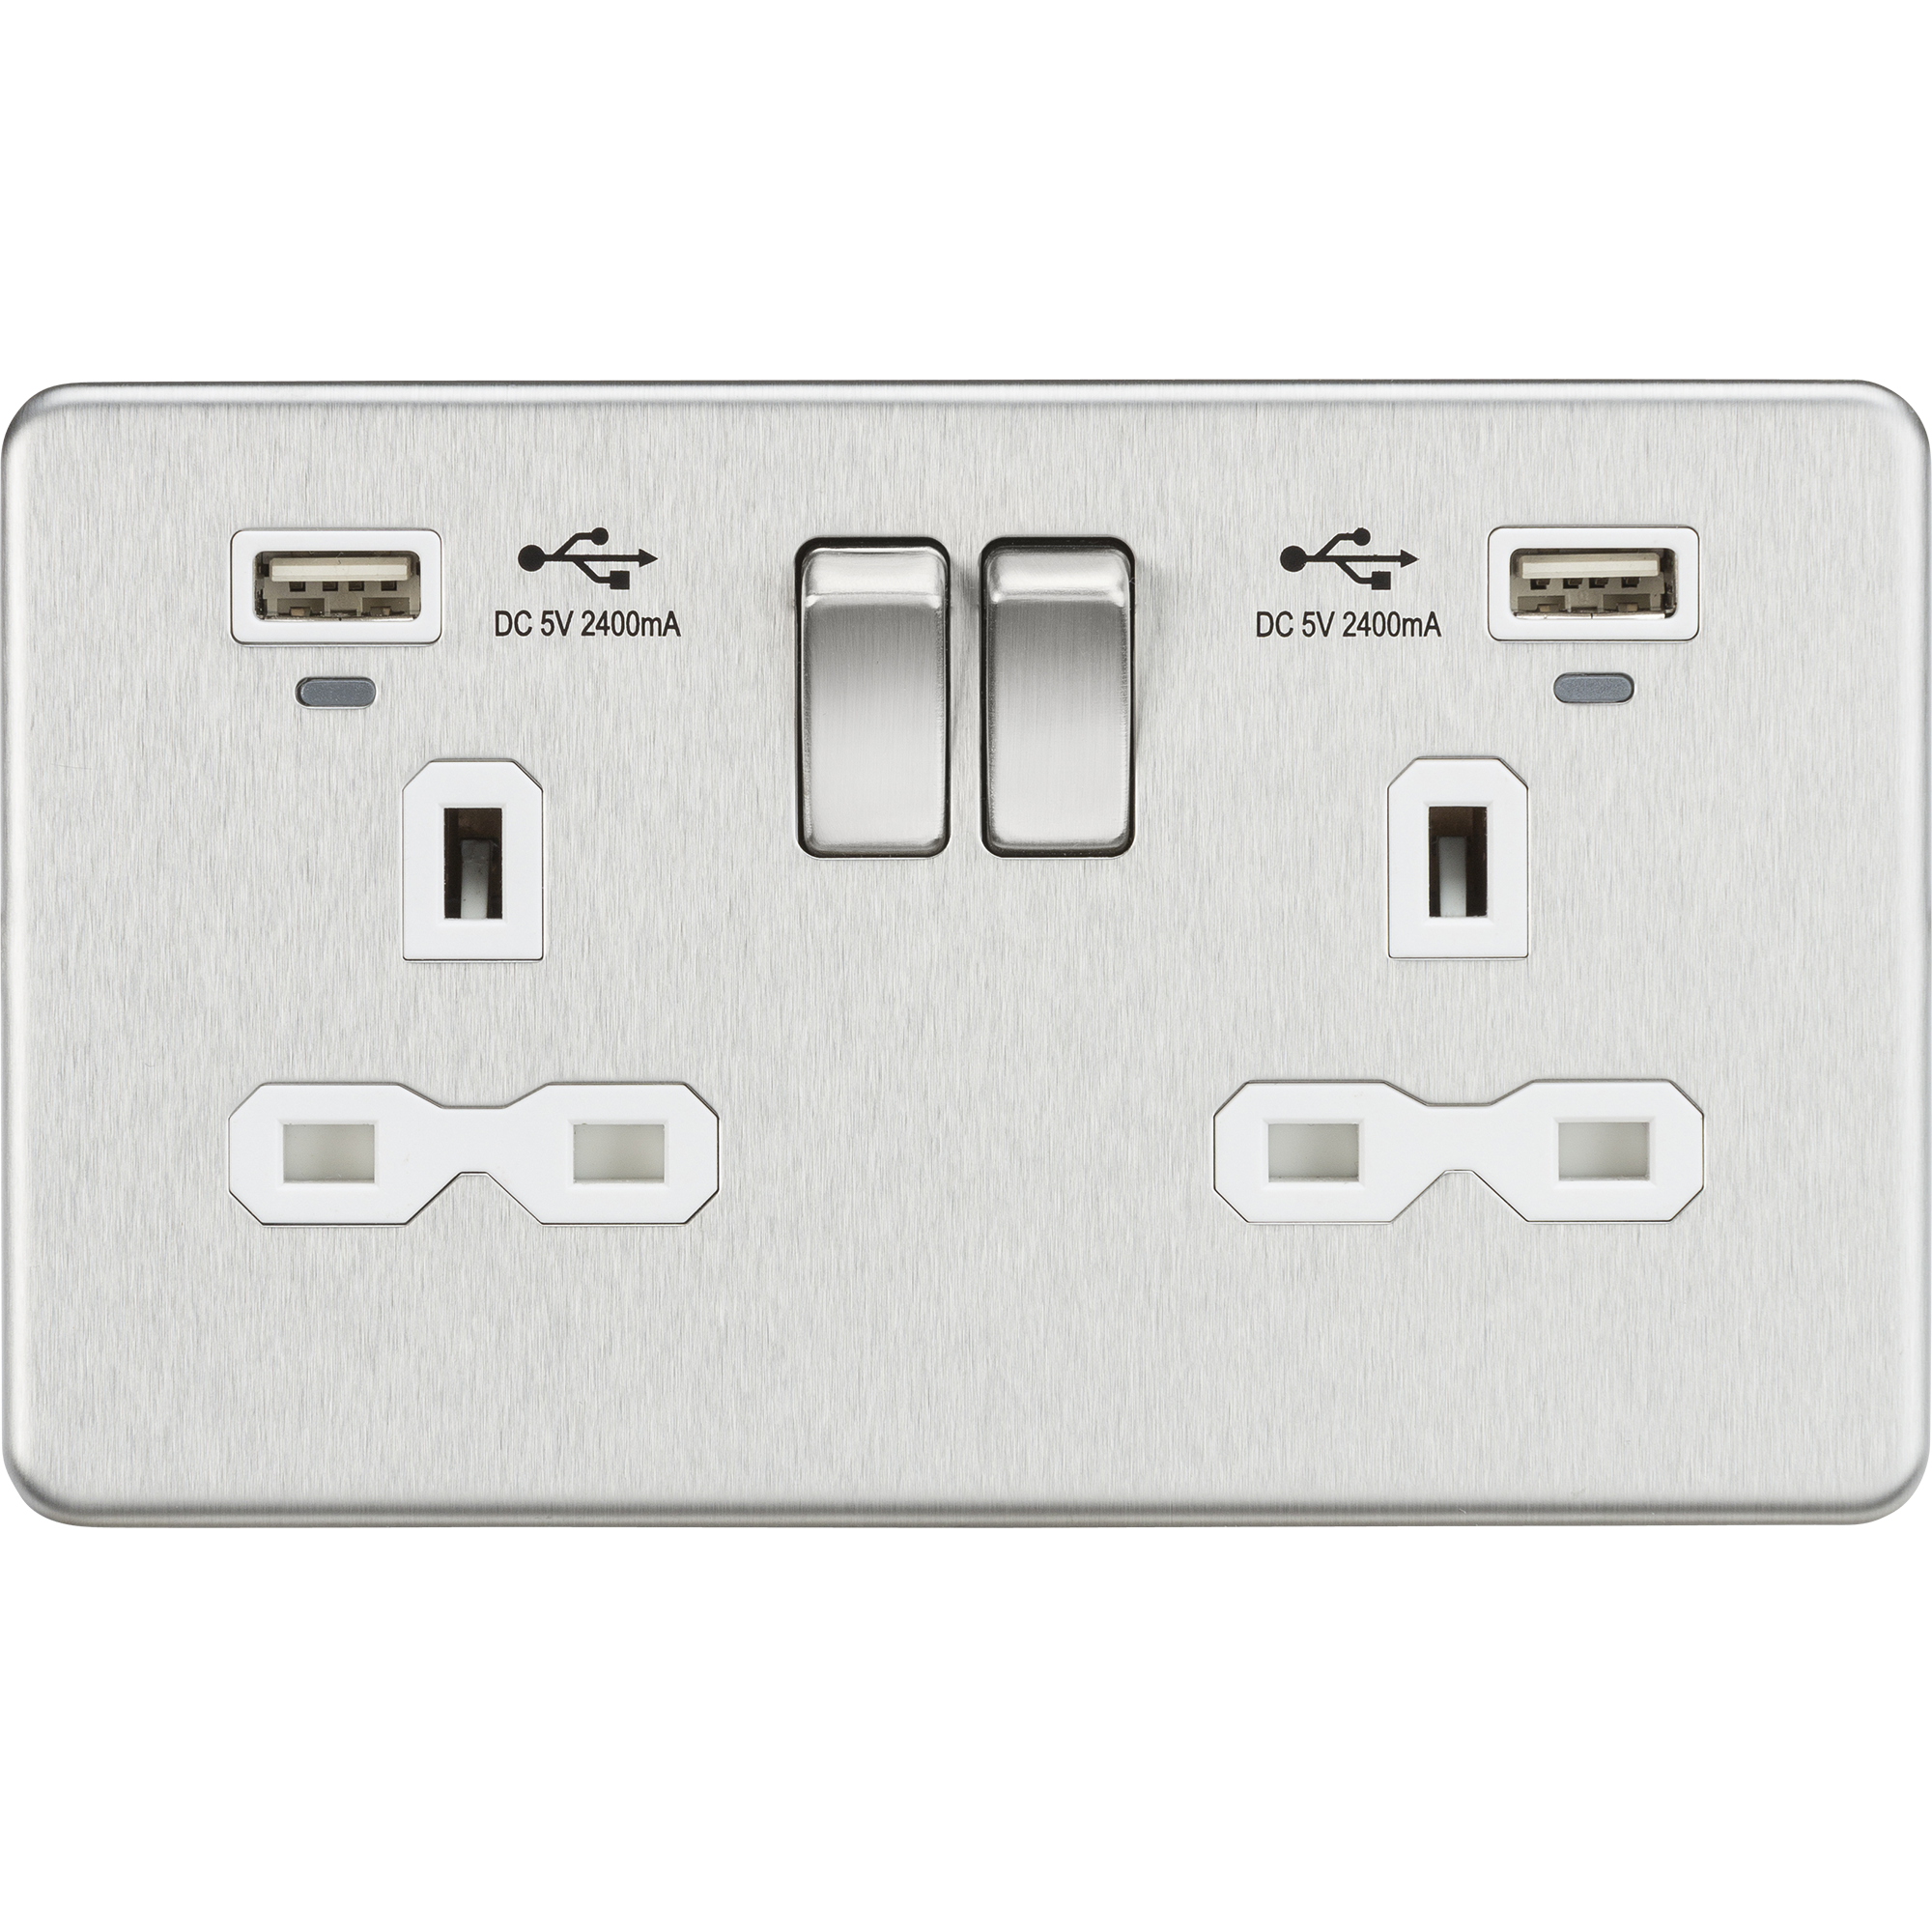 Screwless 13A Smart 2G Switched Socket With Dual USB Charger 2.4A - Brushed Chrome With White Insert - SFR9904NBCW 